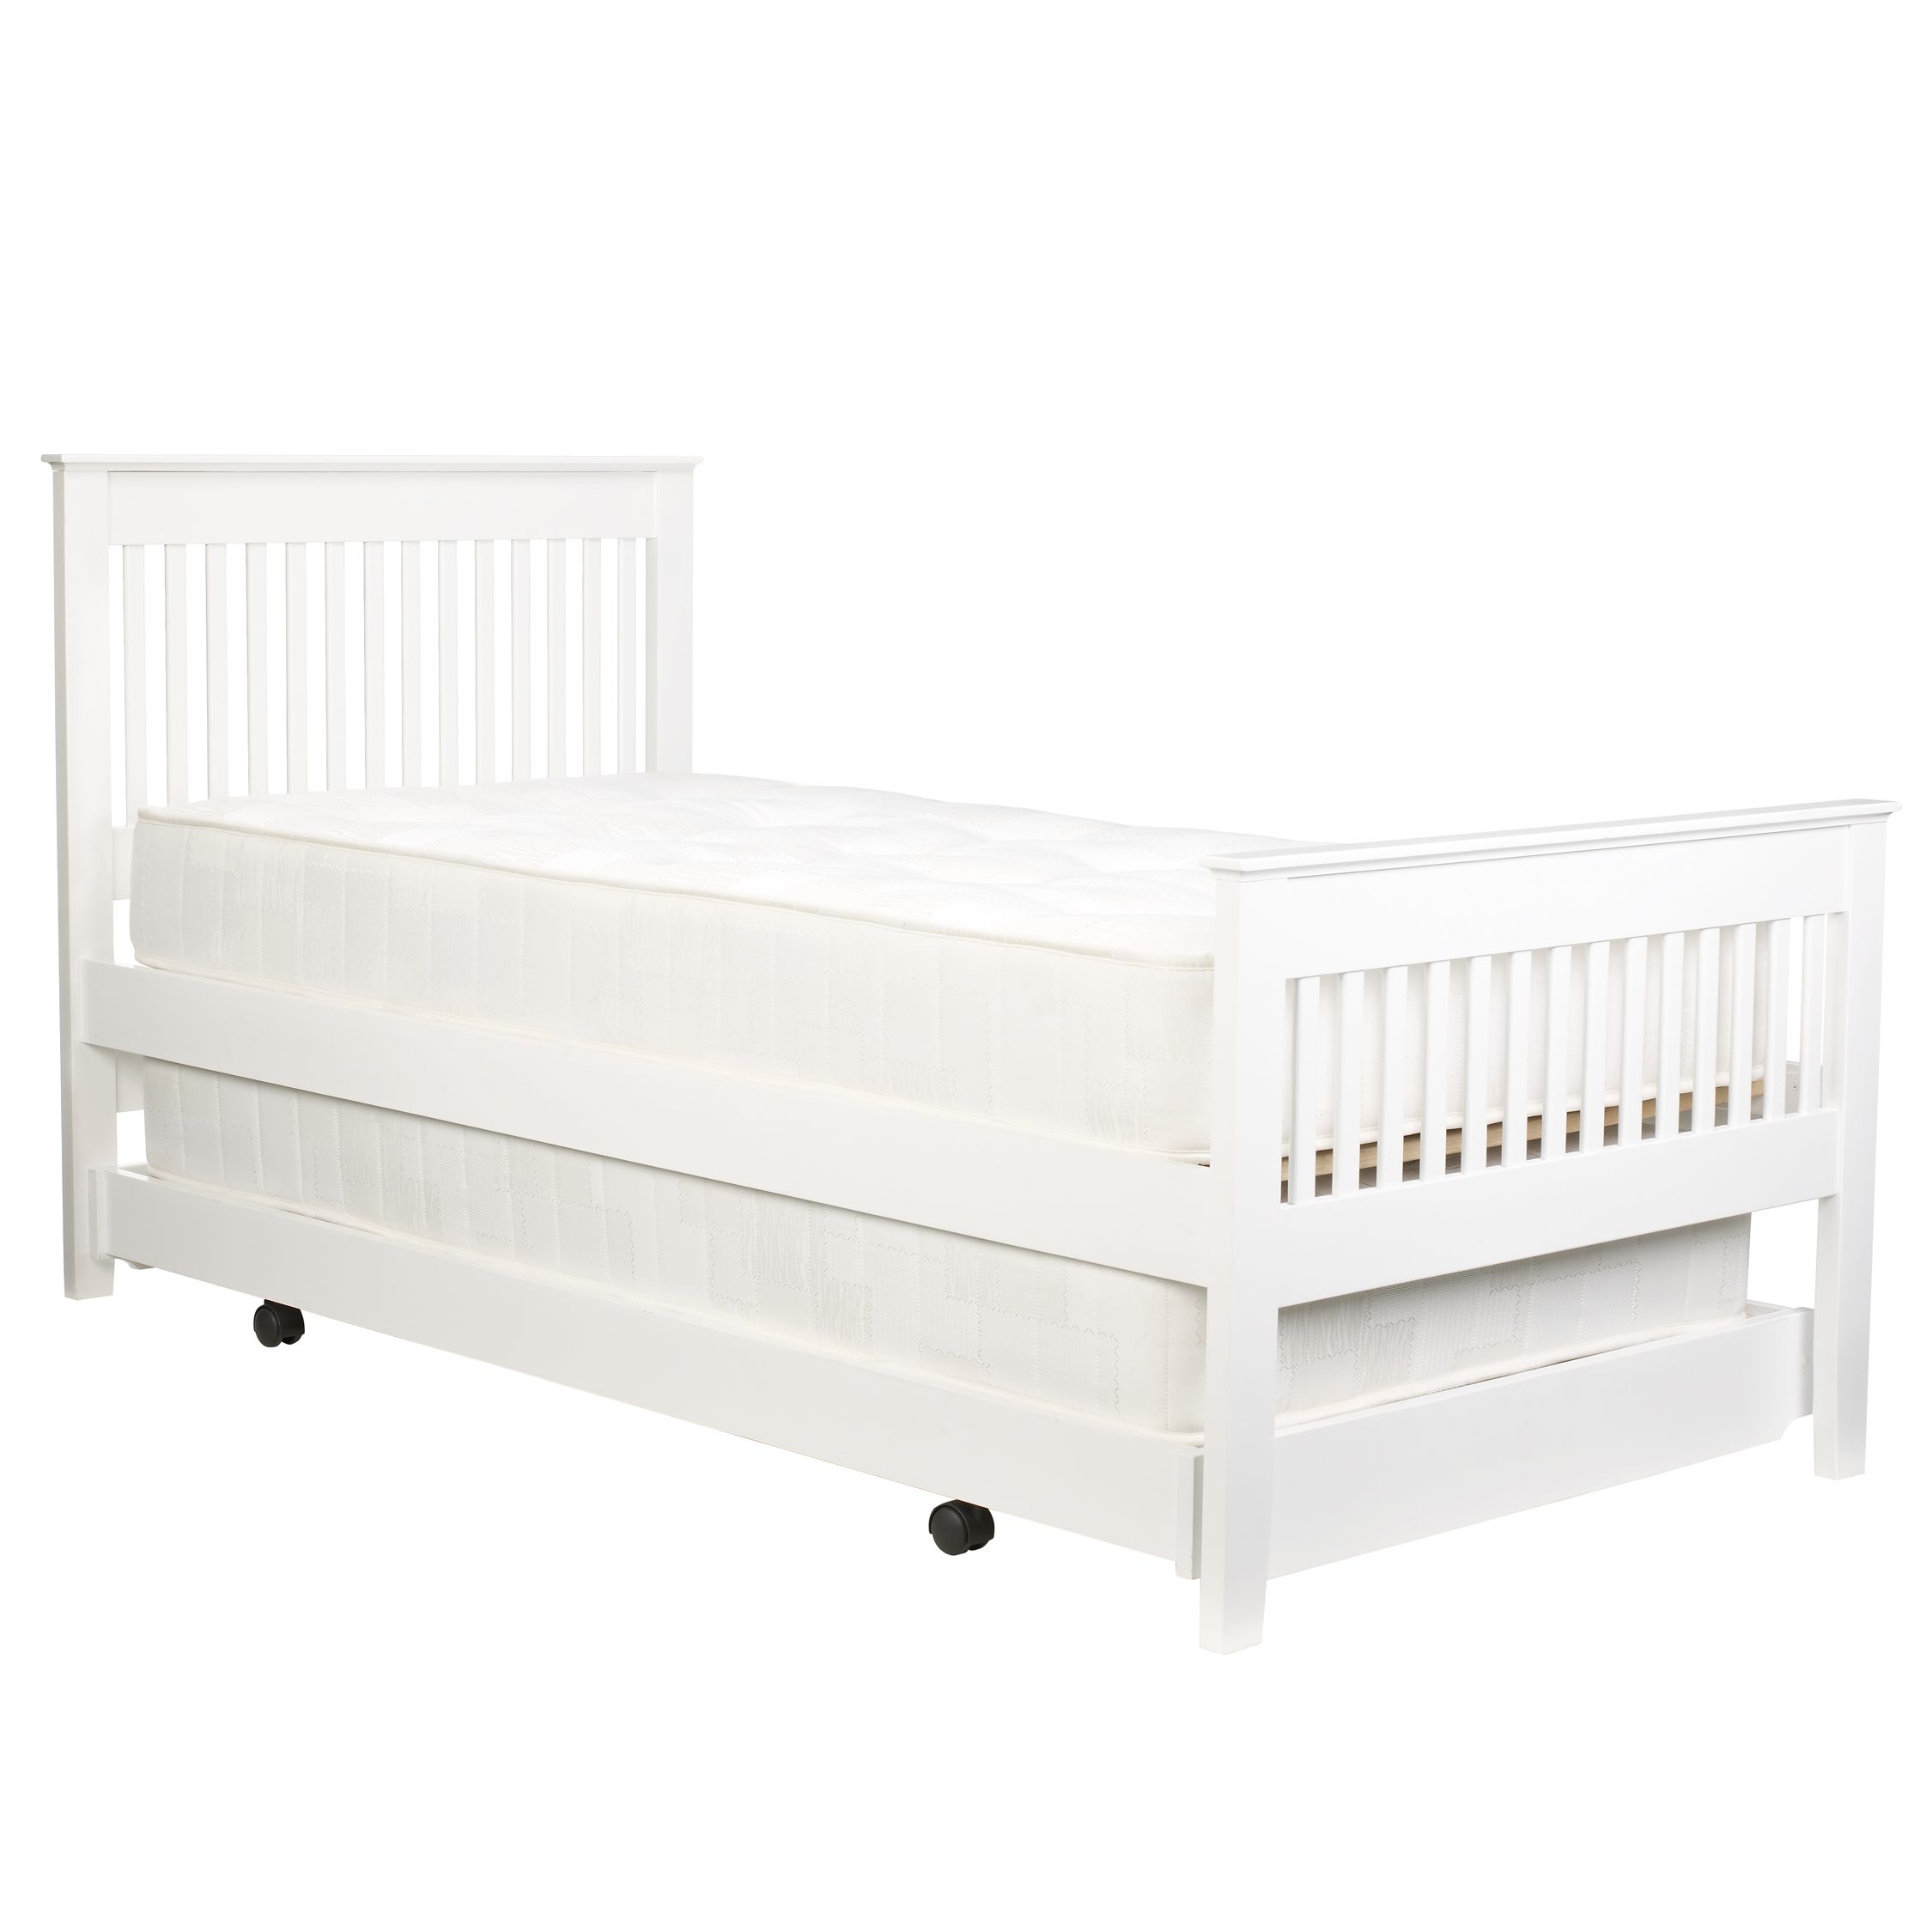 John Lewis Riley Guest Bed, White, Single